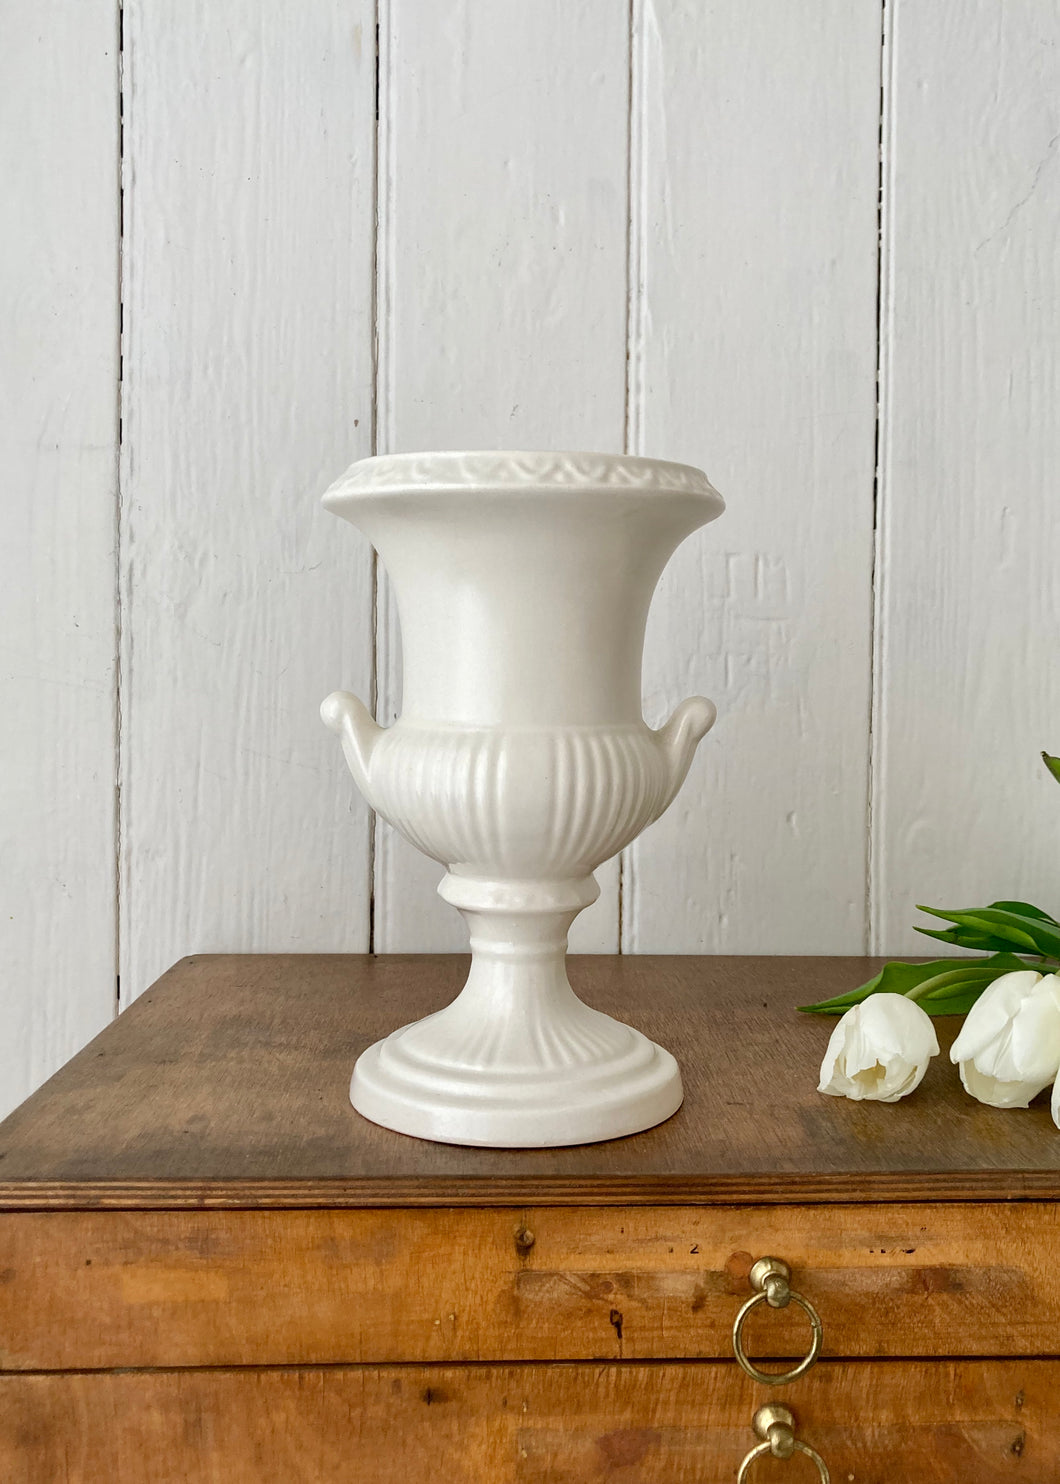 Elegant Dartmouth Pottery classical white mantle urn